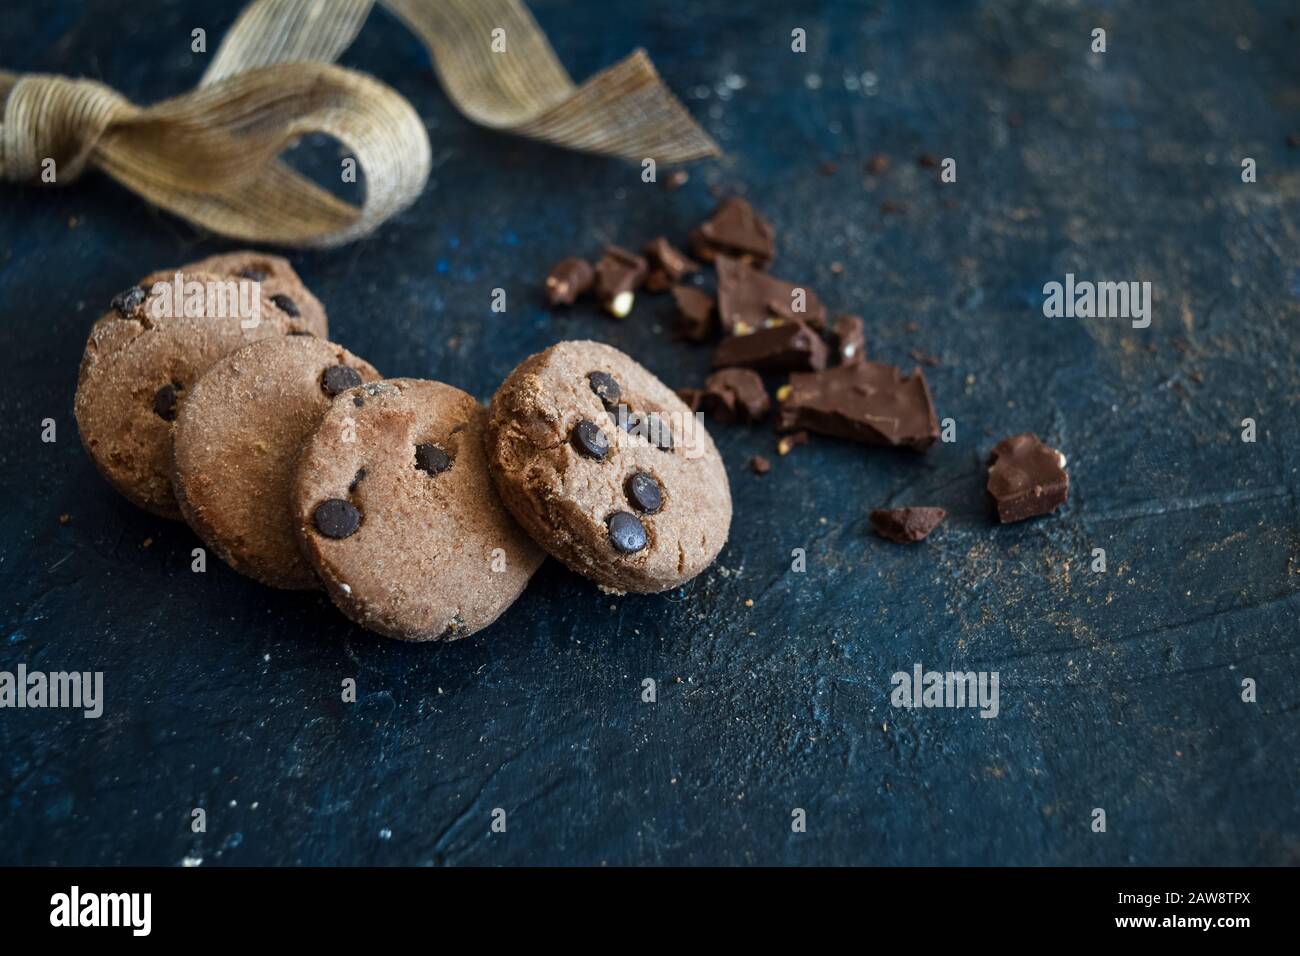 Fresh homemade Chocolate chip cookies with ribbon and dark chocolate, gluten free, cafe, bakery, top view on a dark rustic background, copy space. Stock Photo